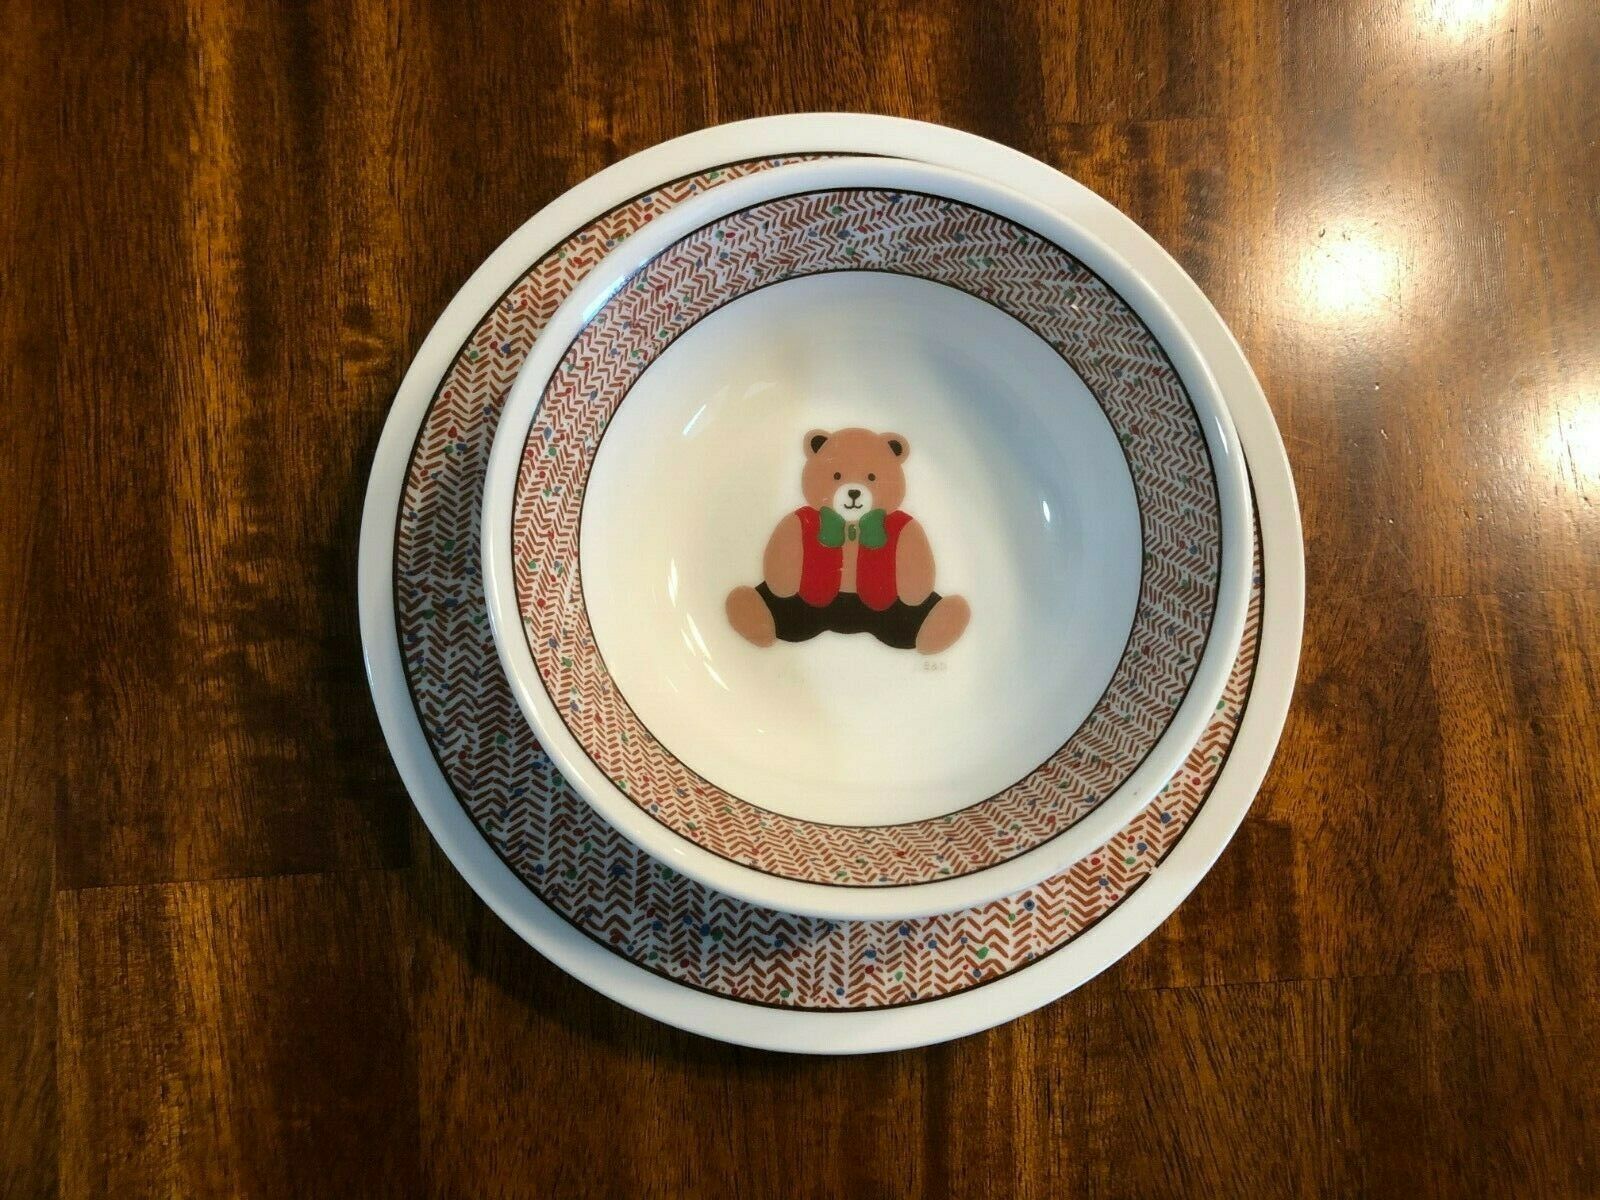 Teddy Bear Ceramic Bowl and Plate by B & D